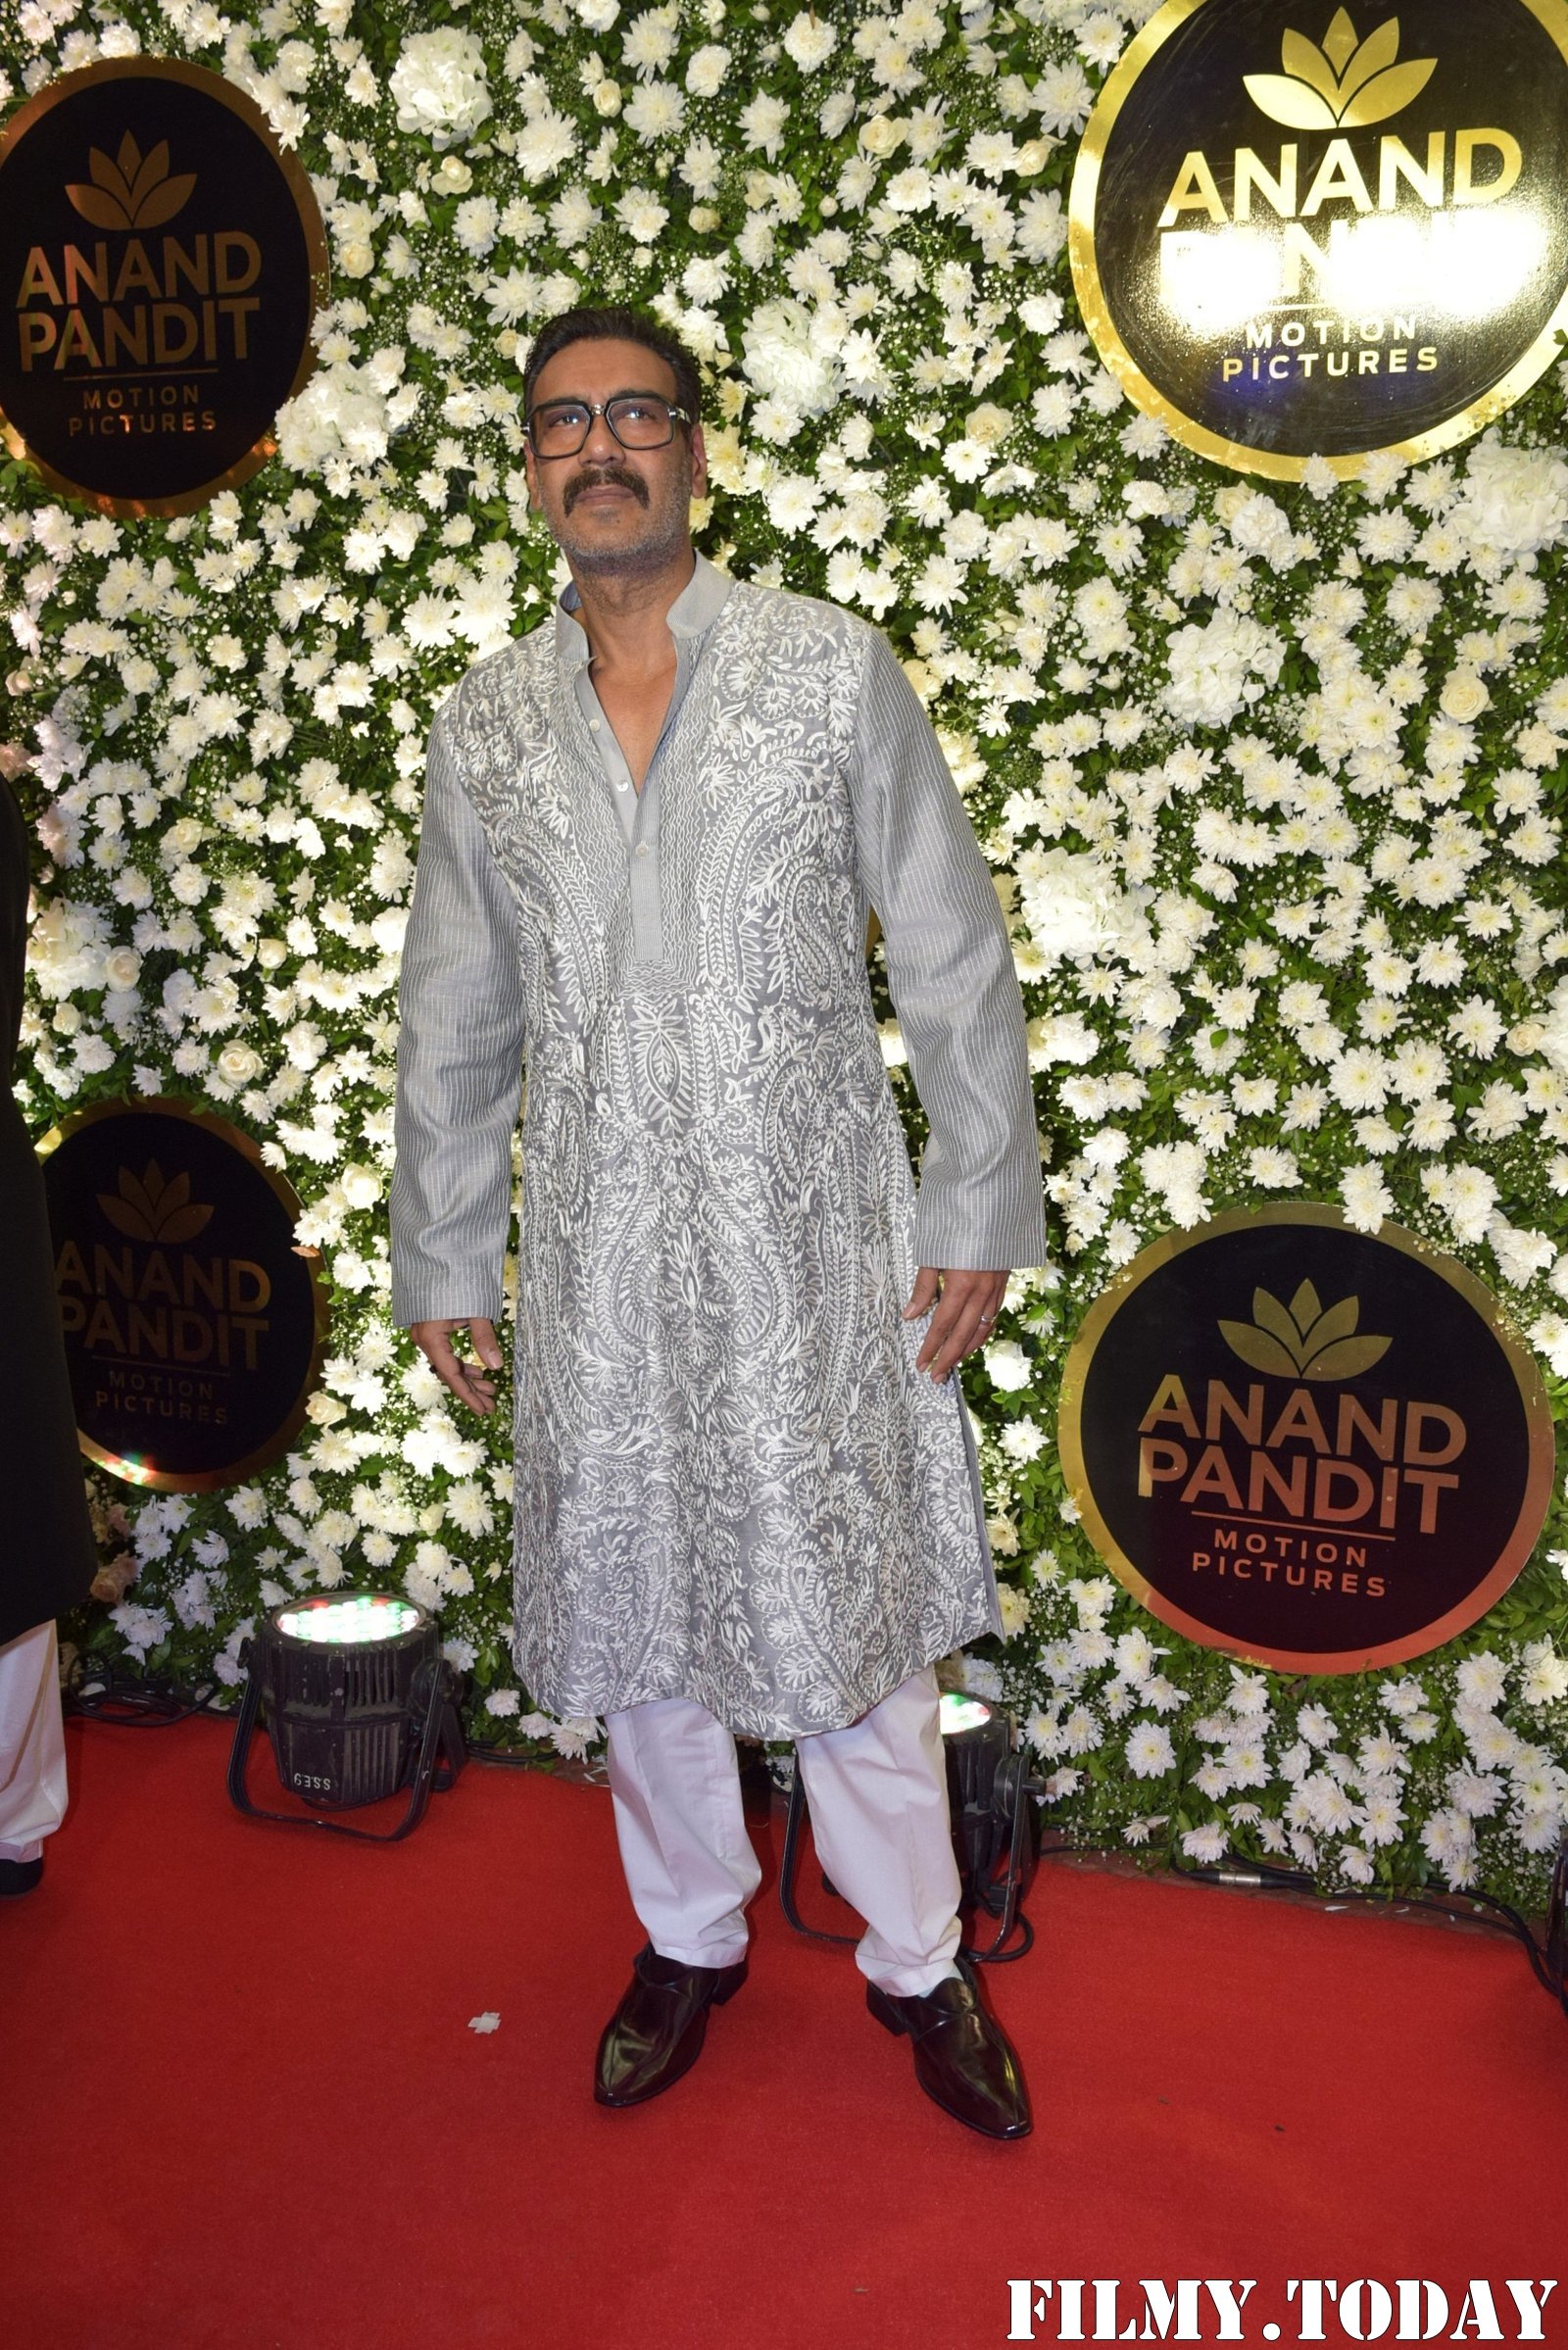 Photos: Celebs At Anand Pandit's Diwali Party | Picture 1693600